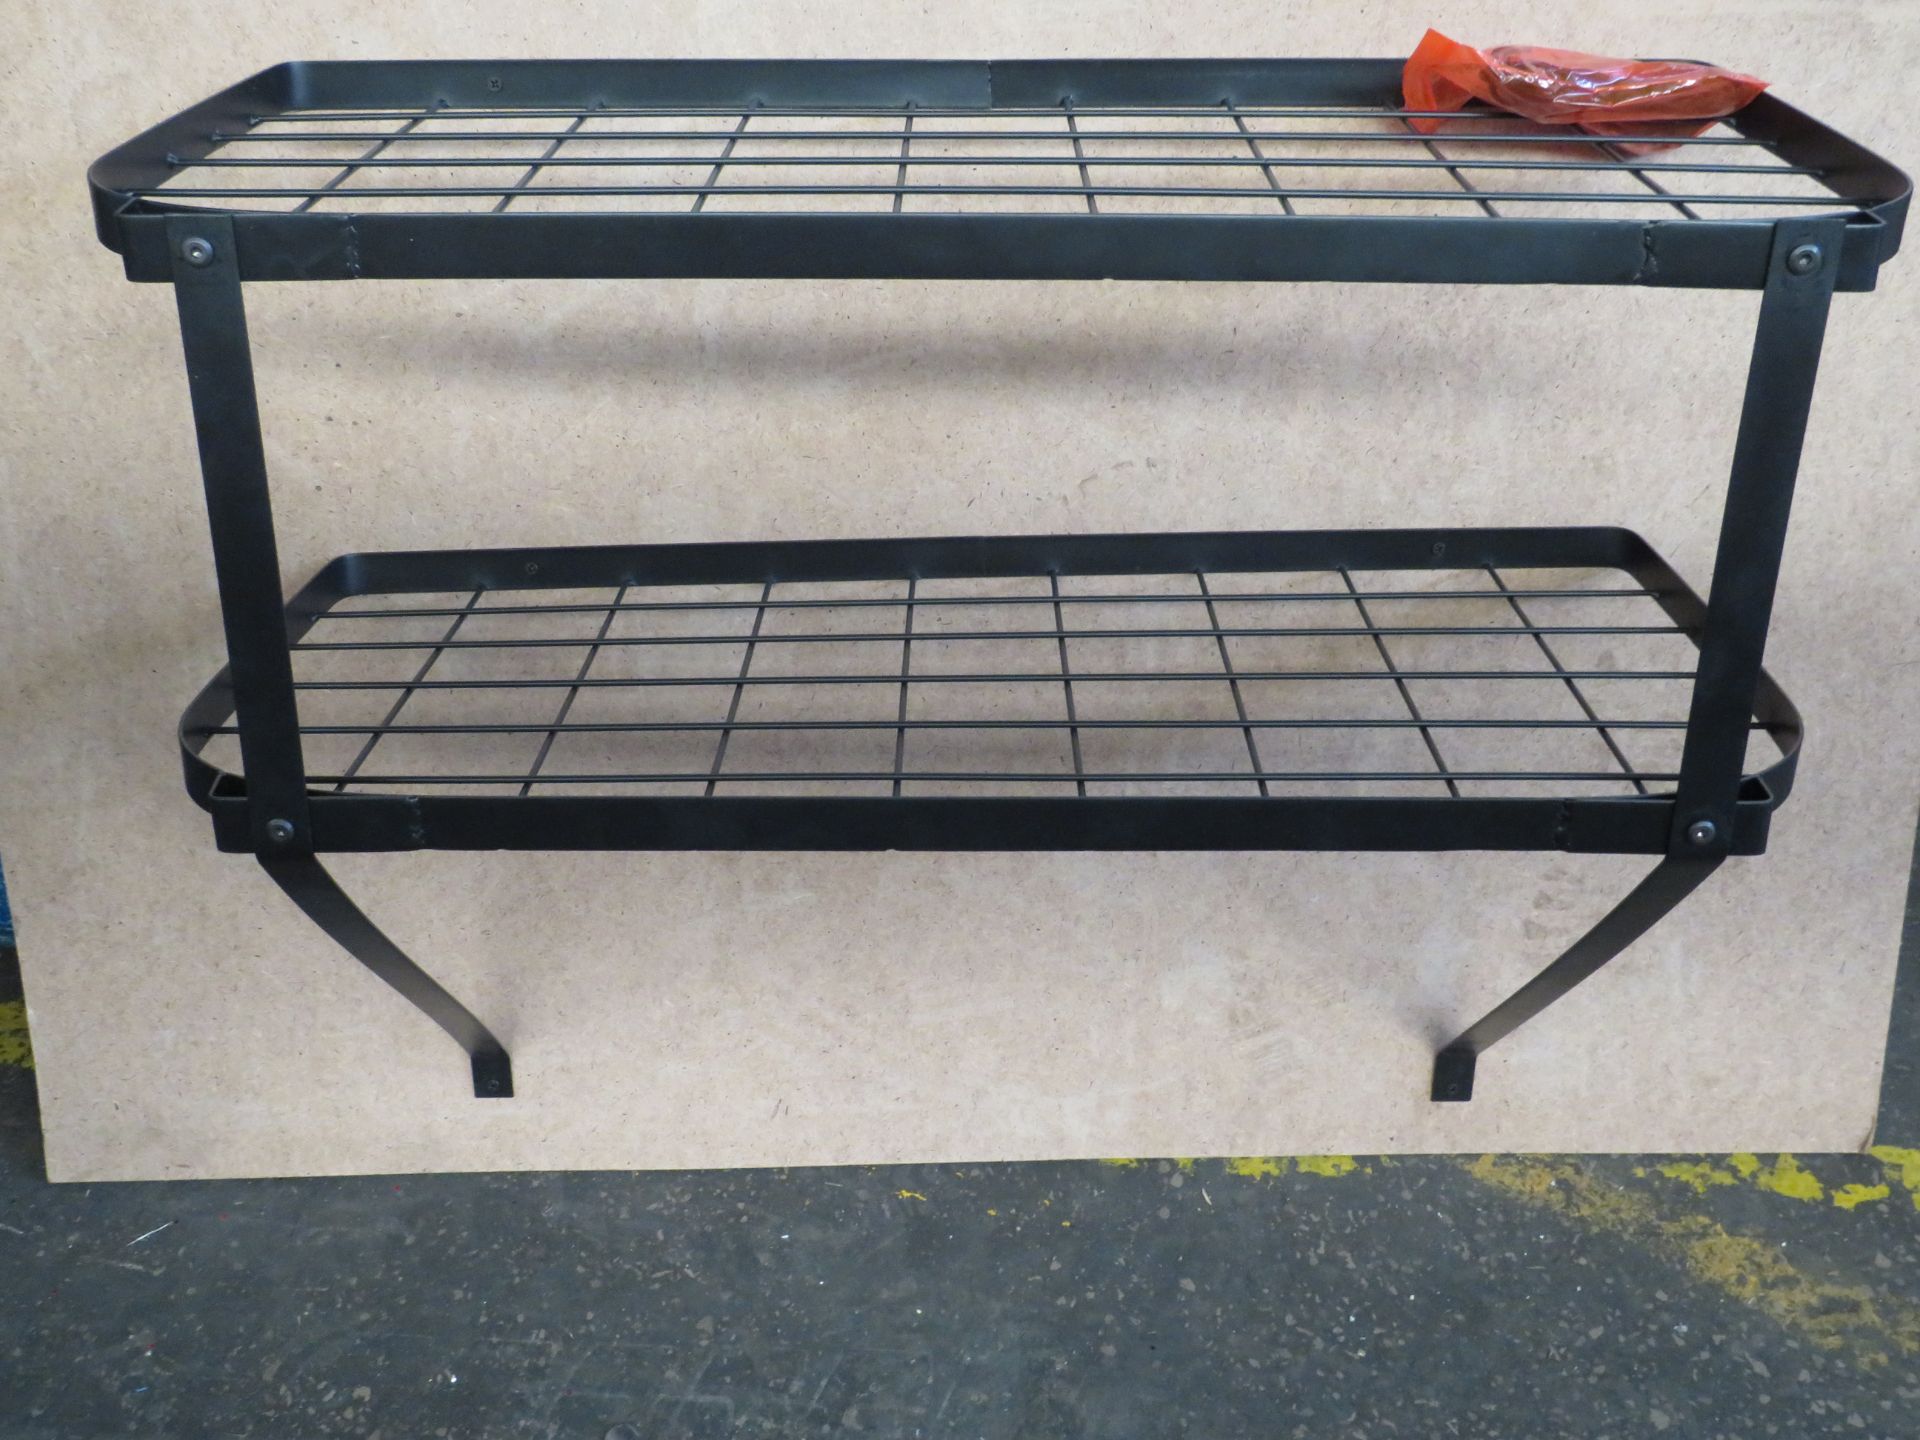 Unbranded - Black Steel Kitchen Double Shelf With Steel Hooks - Great for Pan Storage. - New &